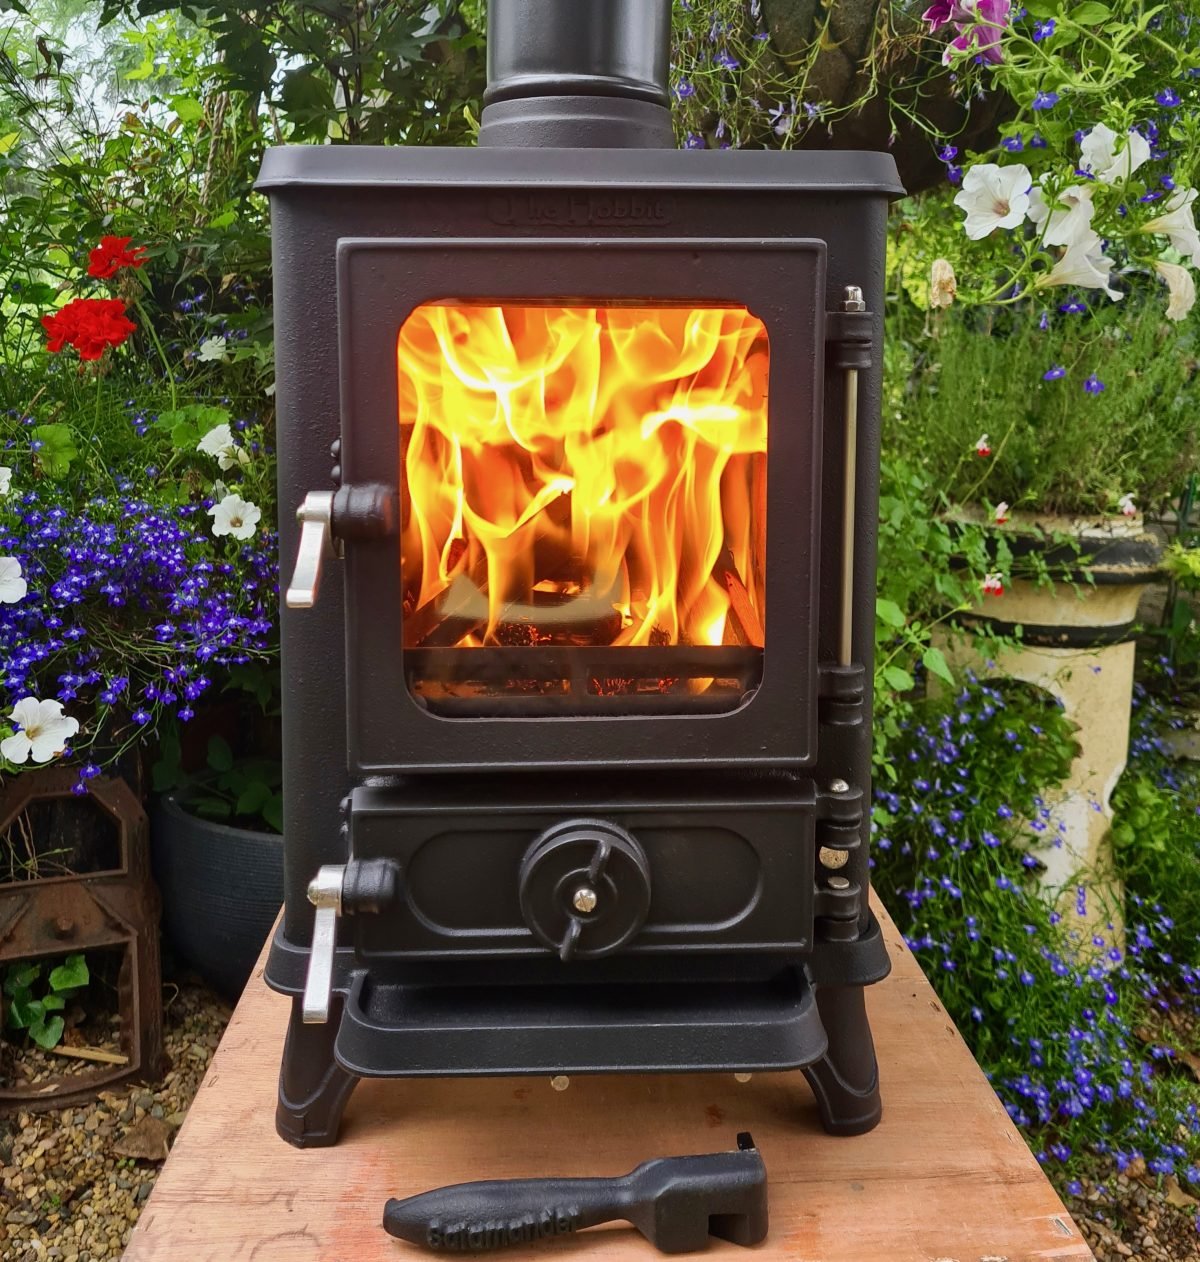 The Hobbit Multifuel Ecodesign SE Defra Approved Stove